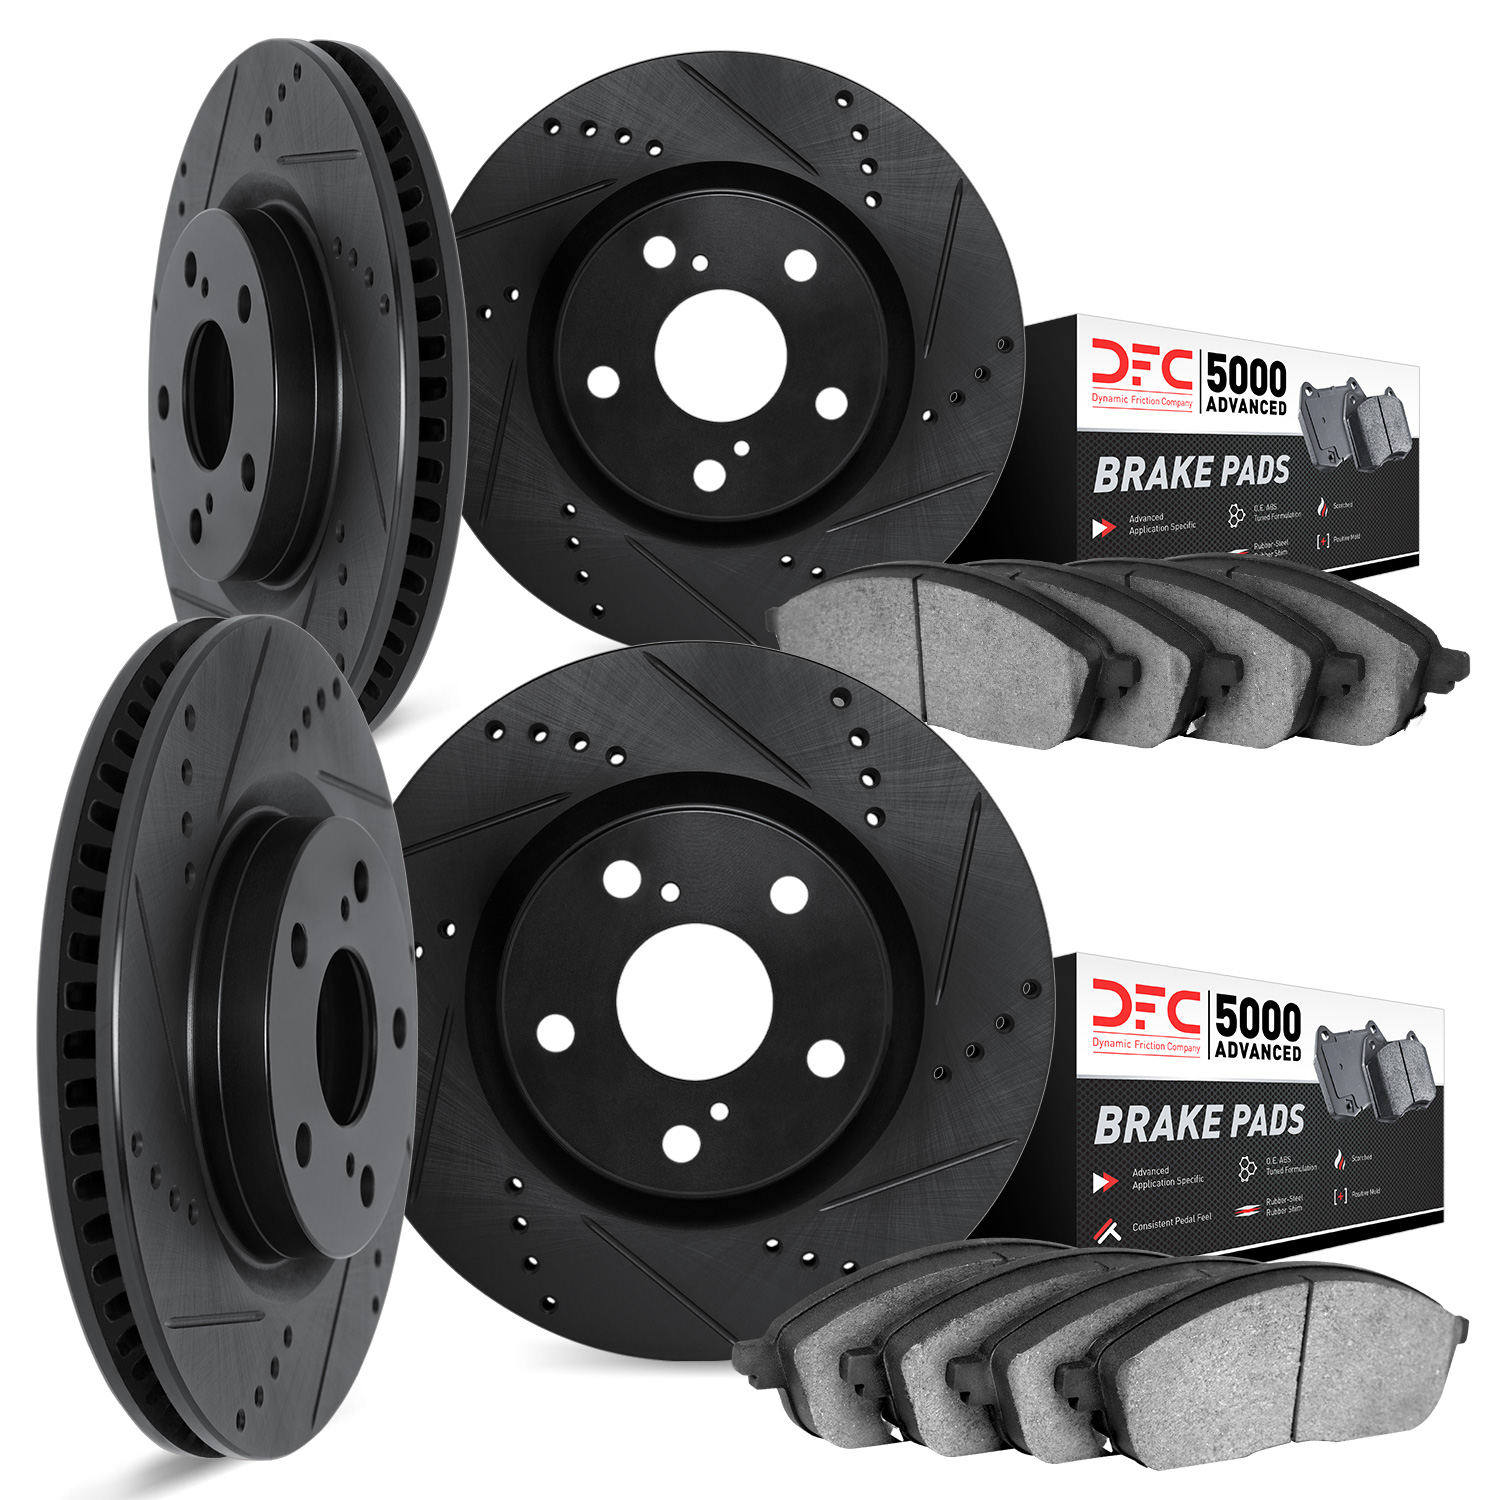 8504-46031 Drilled/Slotted Brake Rotors w/5000 Advanced Brake Pads Kit [Black], 2013-2015 GM, Position: Front and Rear